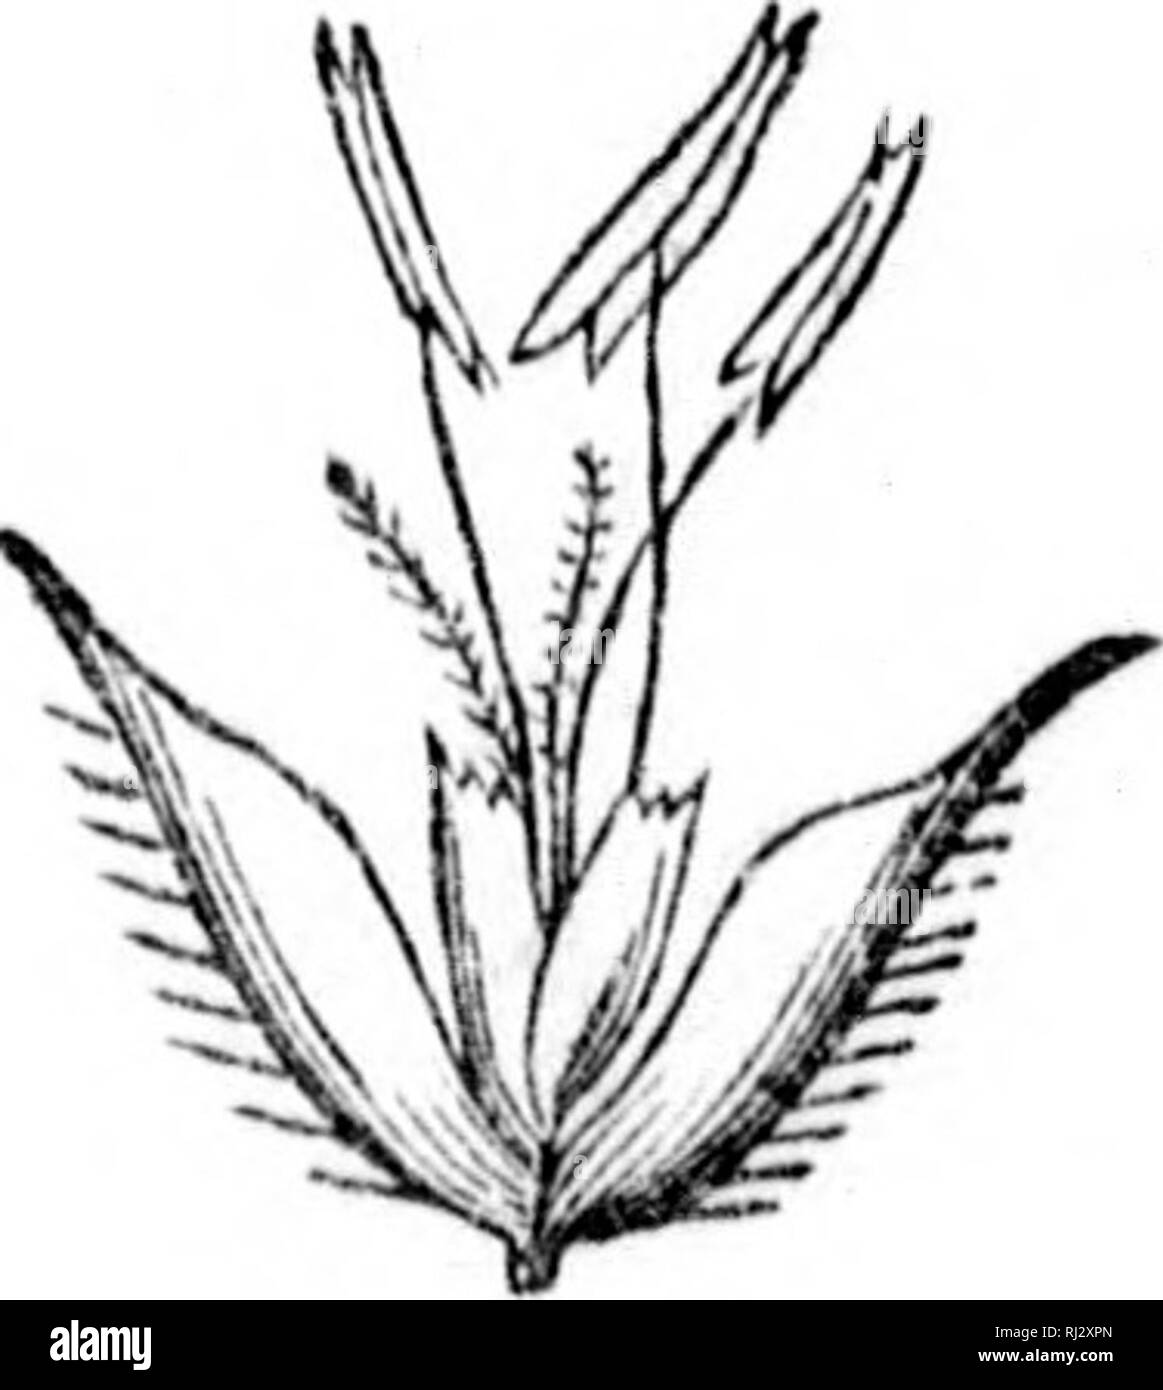 . The elements of structural botany [microform] : with special reference to the study of Canadian plants, to which is added a selection of examination papers. Plant anatomy; Botany; Plantes; Botanique. '8 ELEMENTS OP STRUCTURAL BOTANY. CHAPTER XIV. li m?. p -'B i 'l' .''' 11 '( 11 i J 1 i' 11 EXAMINATION OF GLUMACEOUS PLANTS—TIMOTHY AND OTHER GRASSES. 100. Timothy. The top of a stalk of this well- known grass is cylindrical in shape, and upon examina- tion vvill be found to consist of a vast number of similar pieces compactly arranged on very short pedicels about the stalk as an axis. Carefull Stock Photo